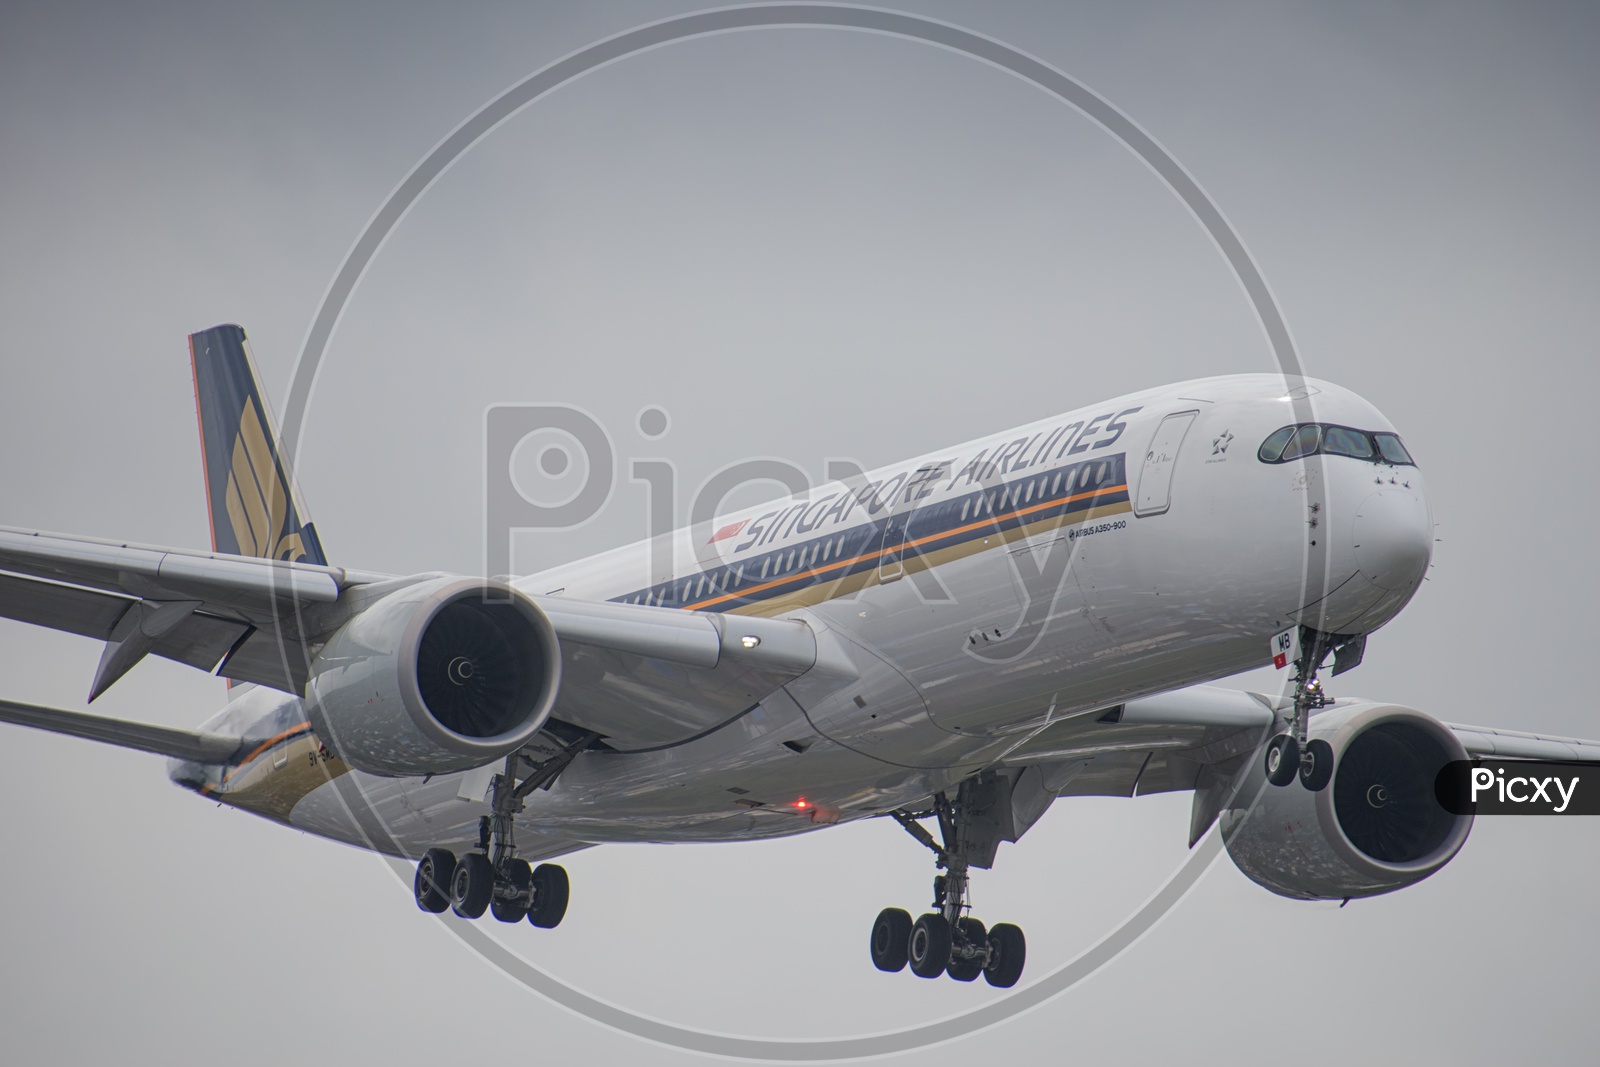 Singapore Airlines A350